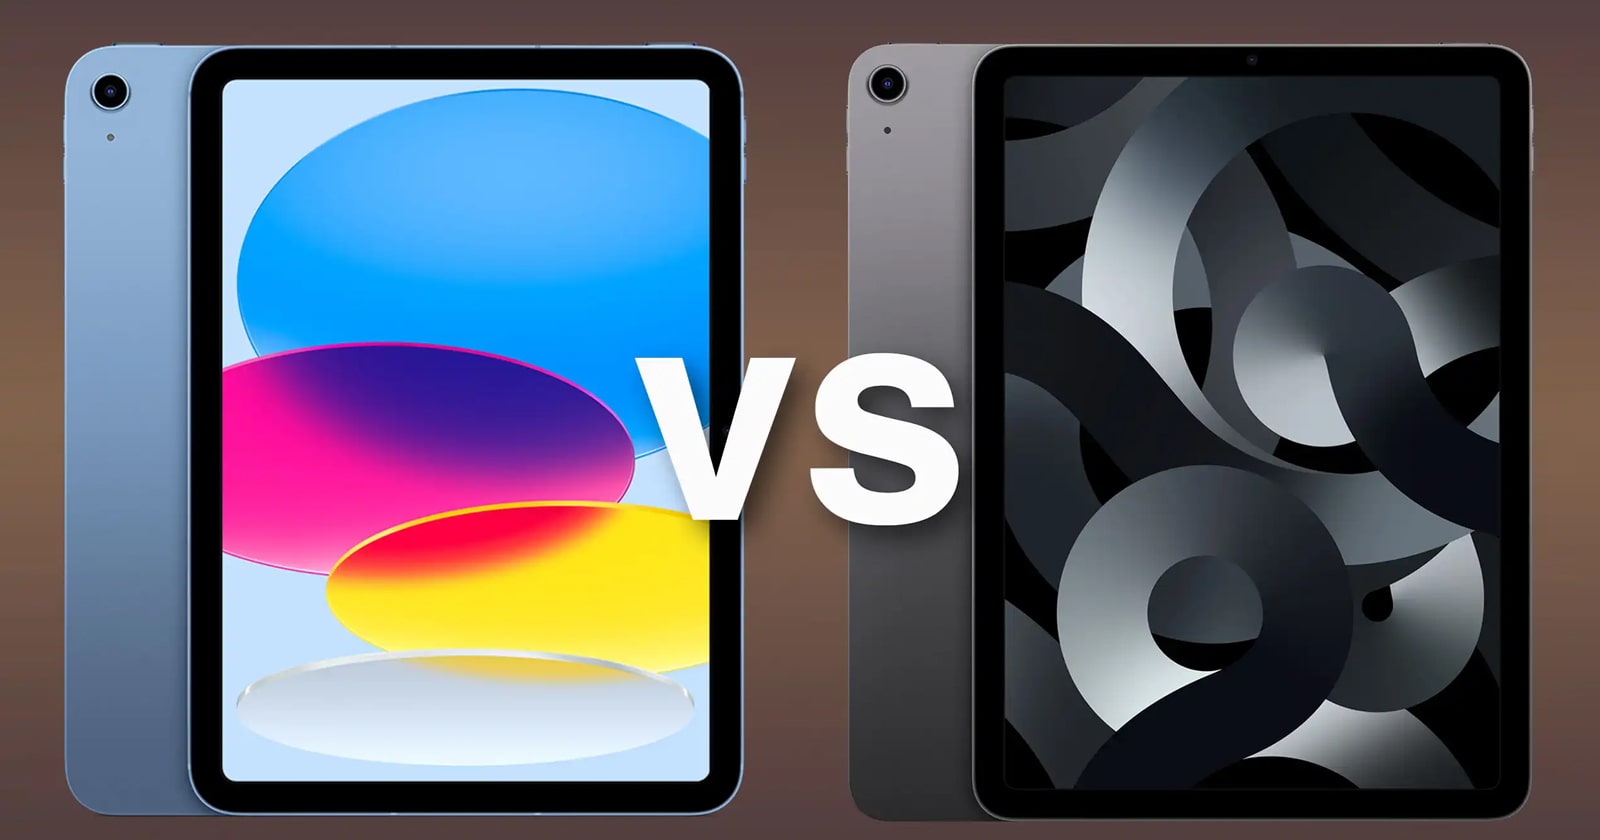 What Is the Difference Between iPad and iPad Air 2 ?